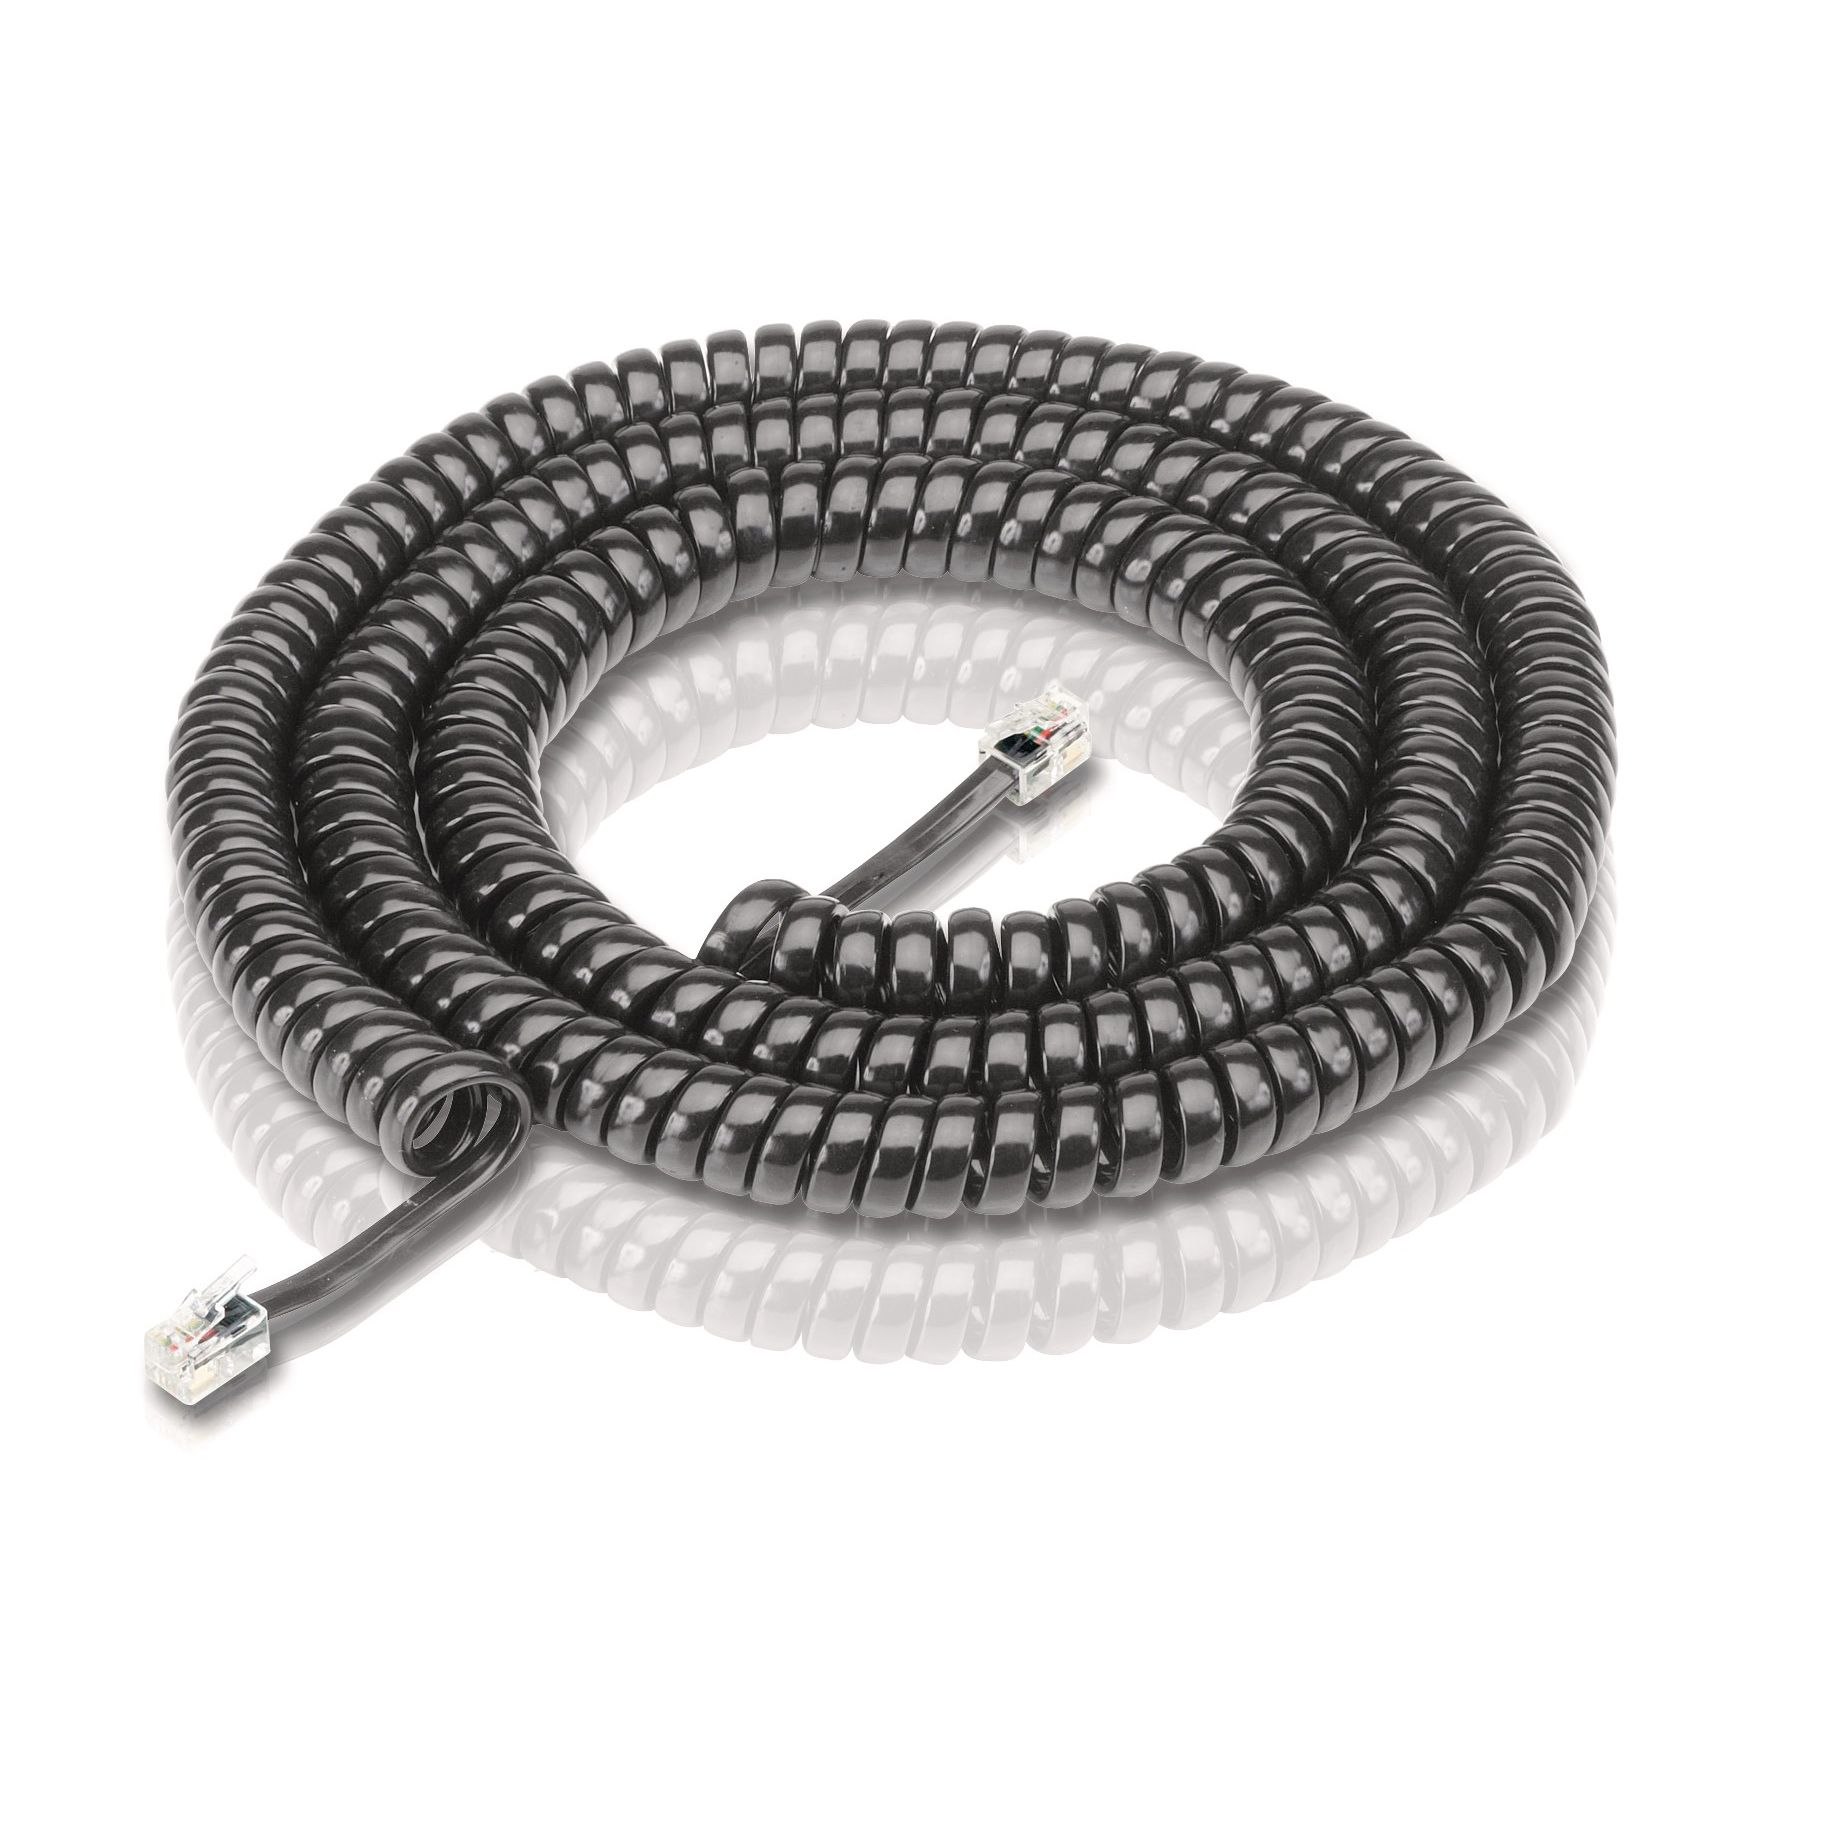 Philips SWL4165H/17 25' Blackcoil cord SWL4165H